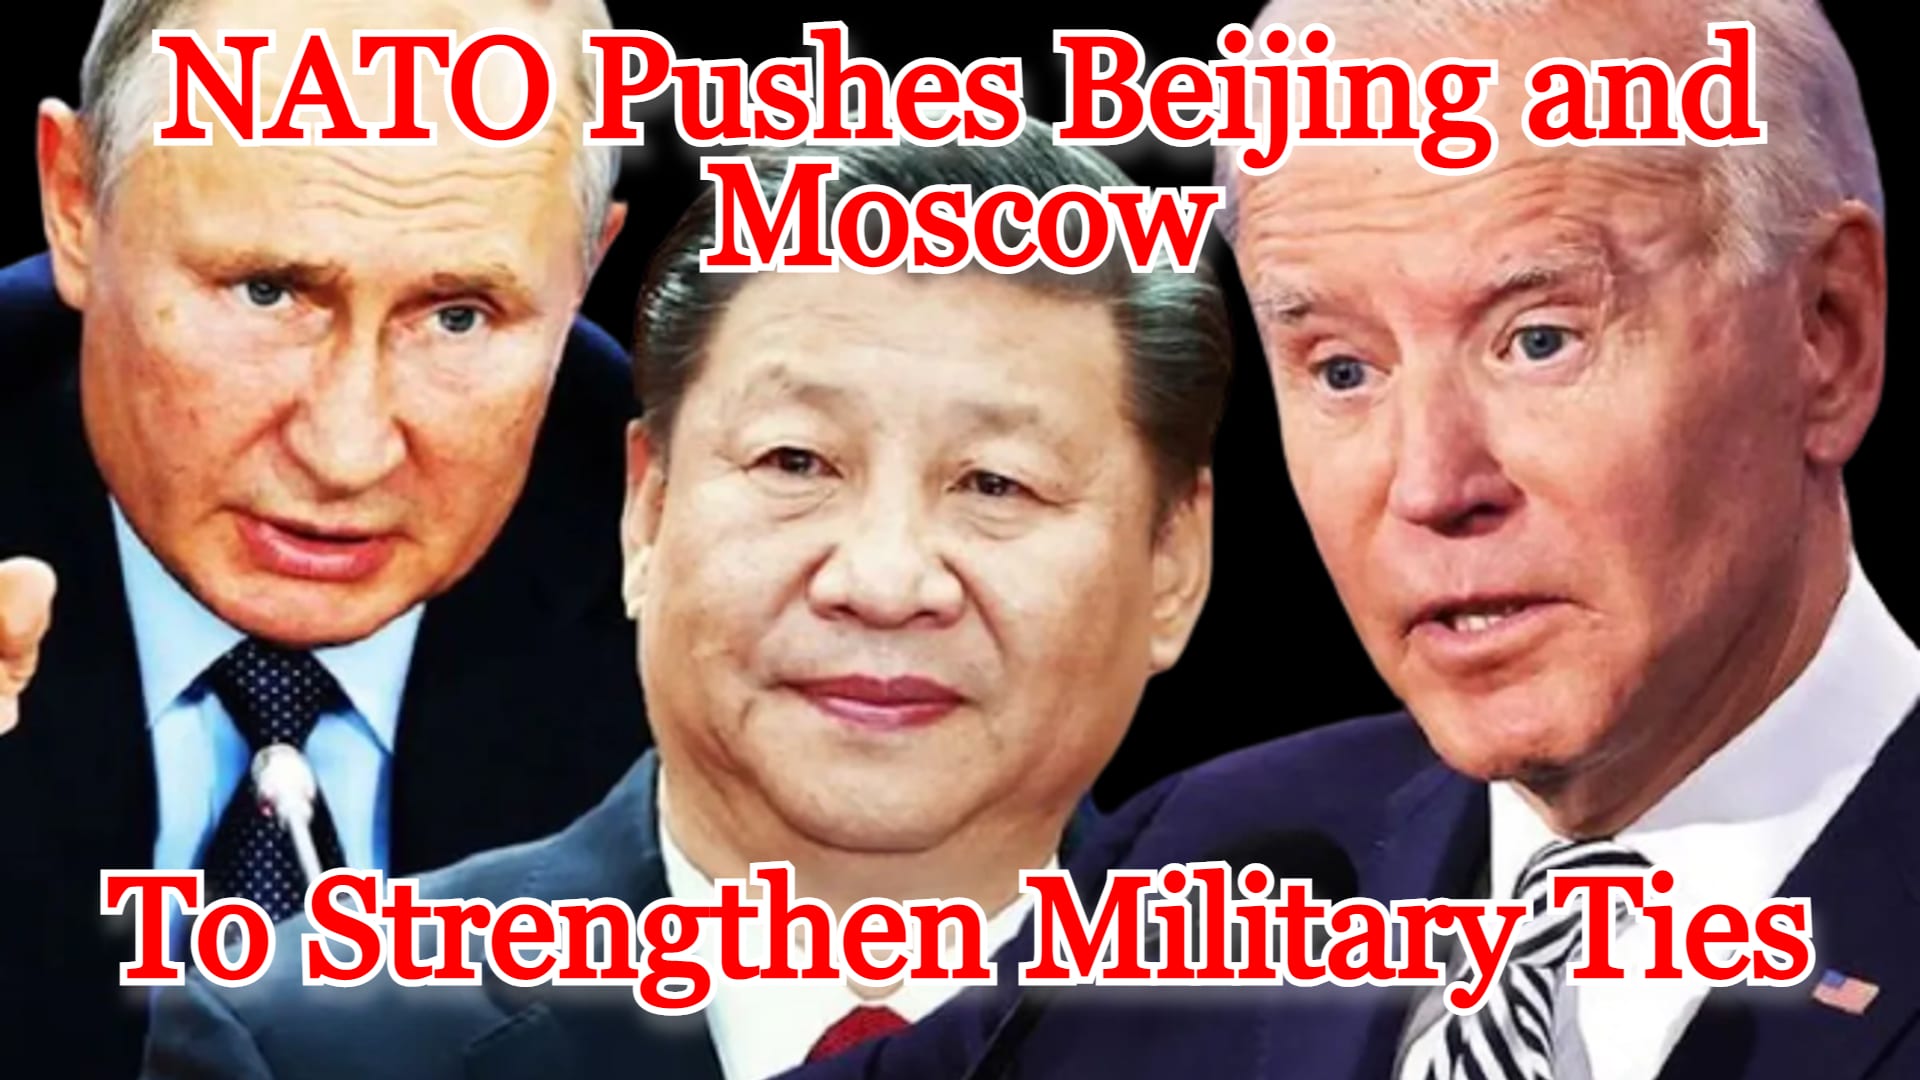 COI #357: NATO Pushes Beijing and Moscow to Strengthen Military Ties